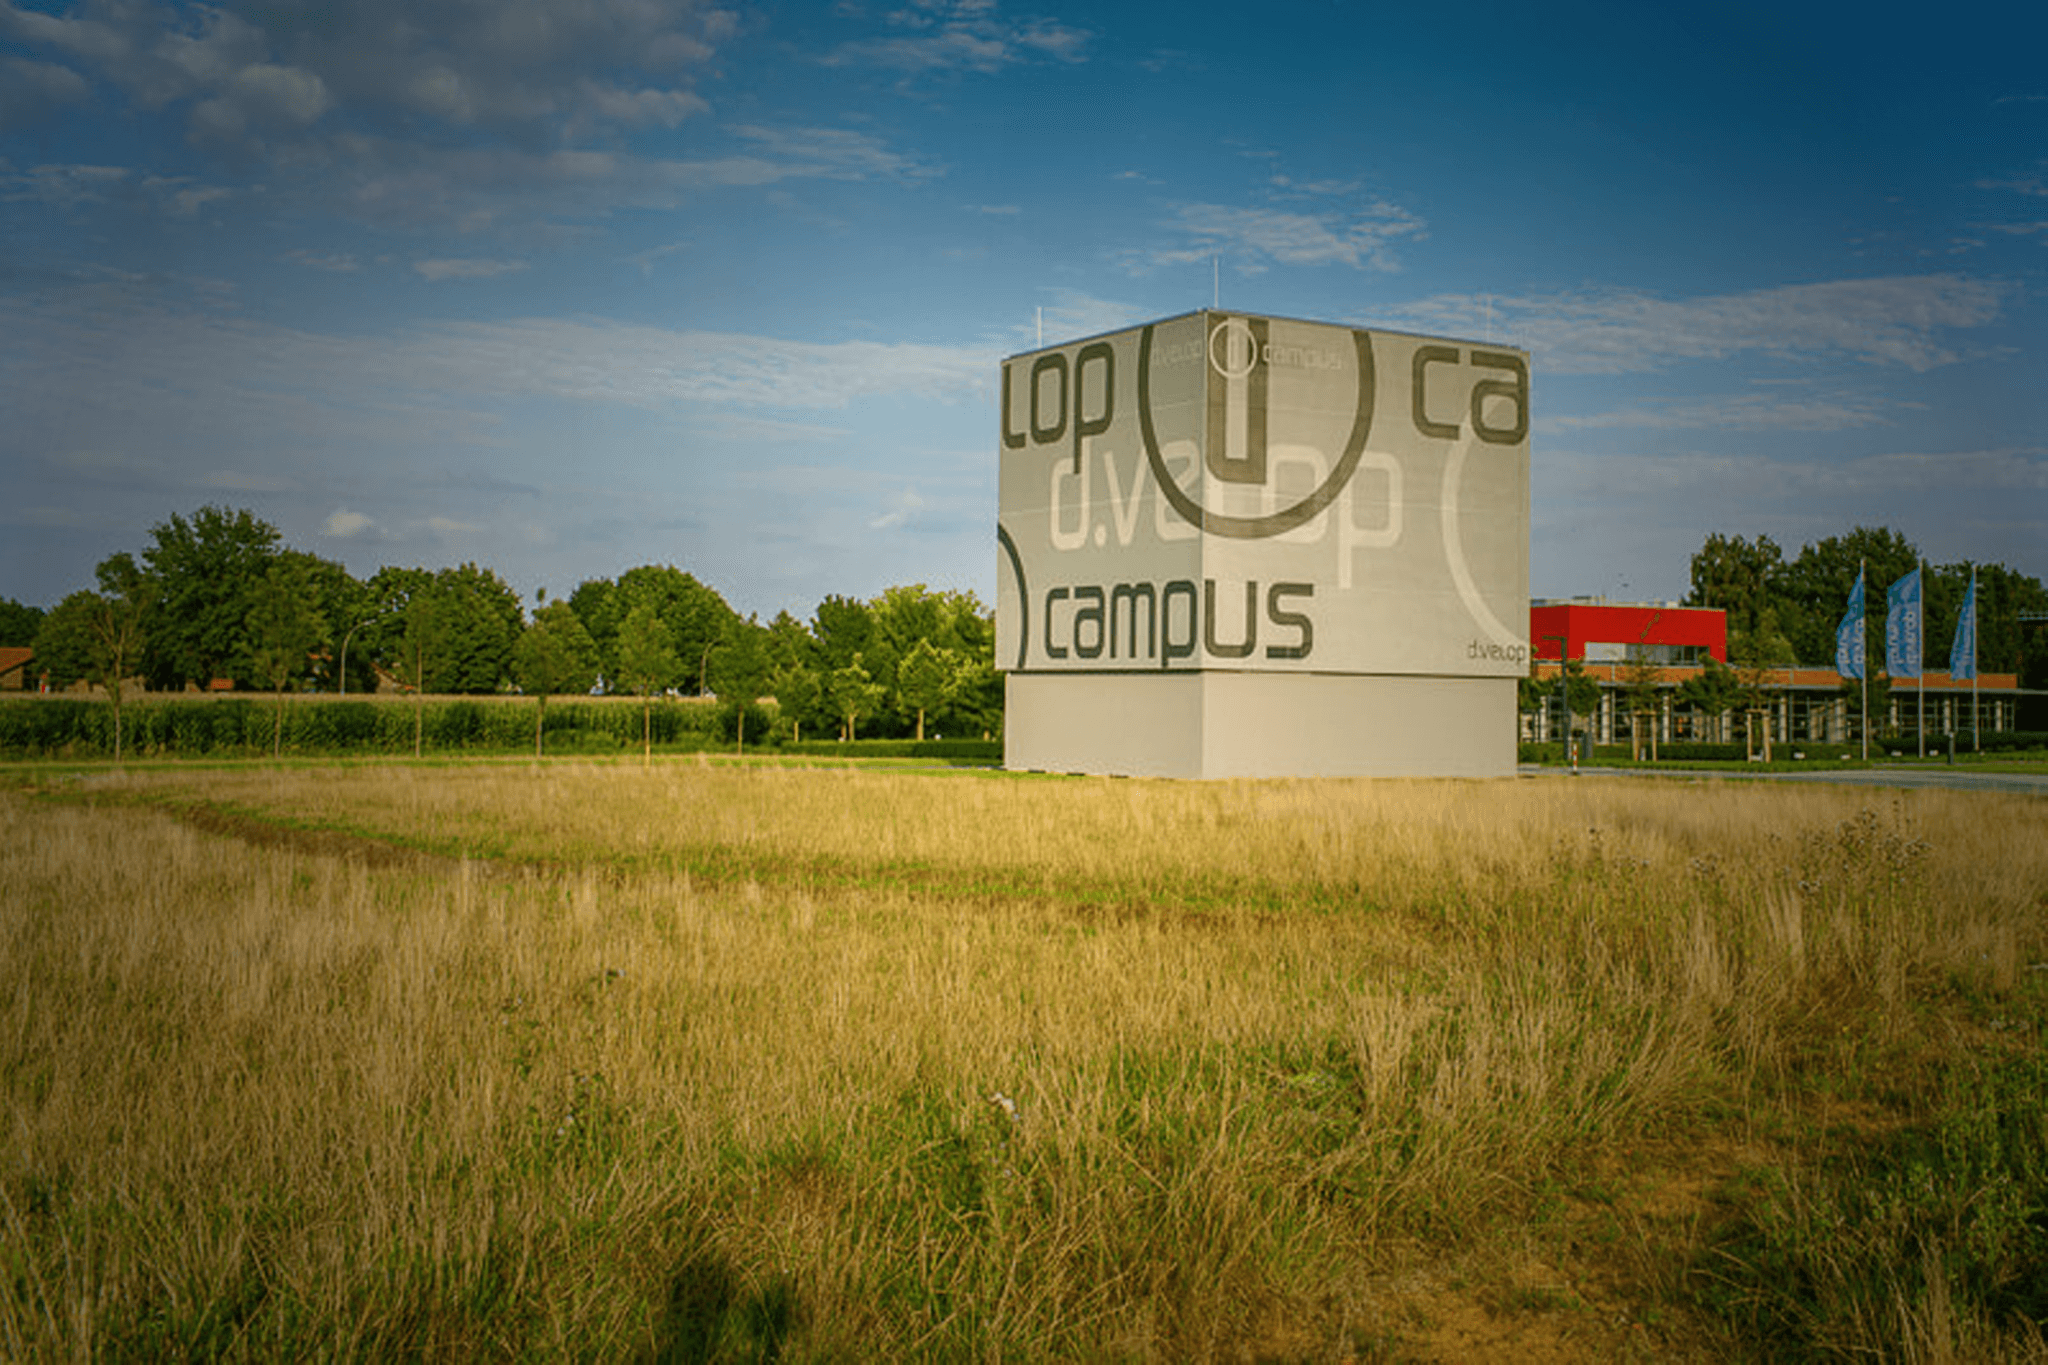 Picture of the d.velop campus with campus cube